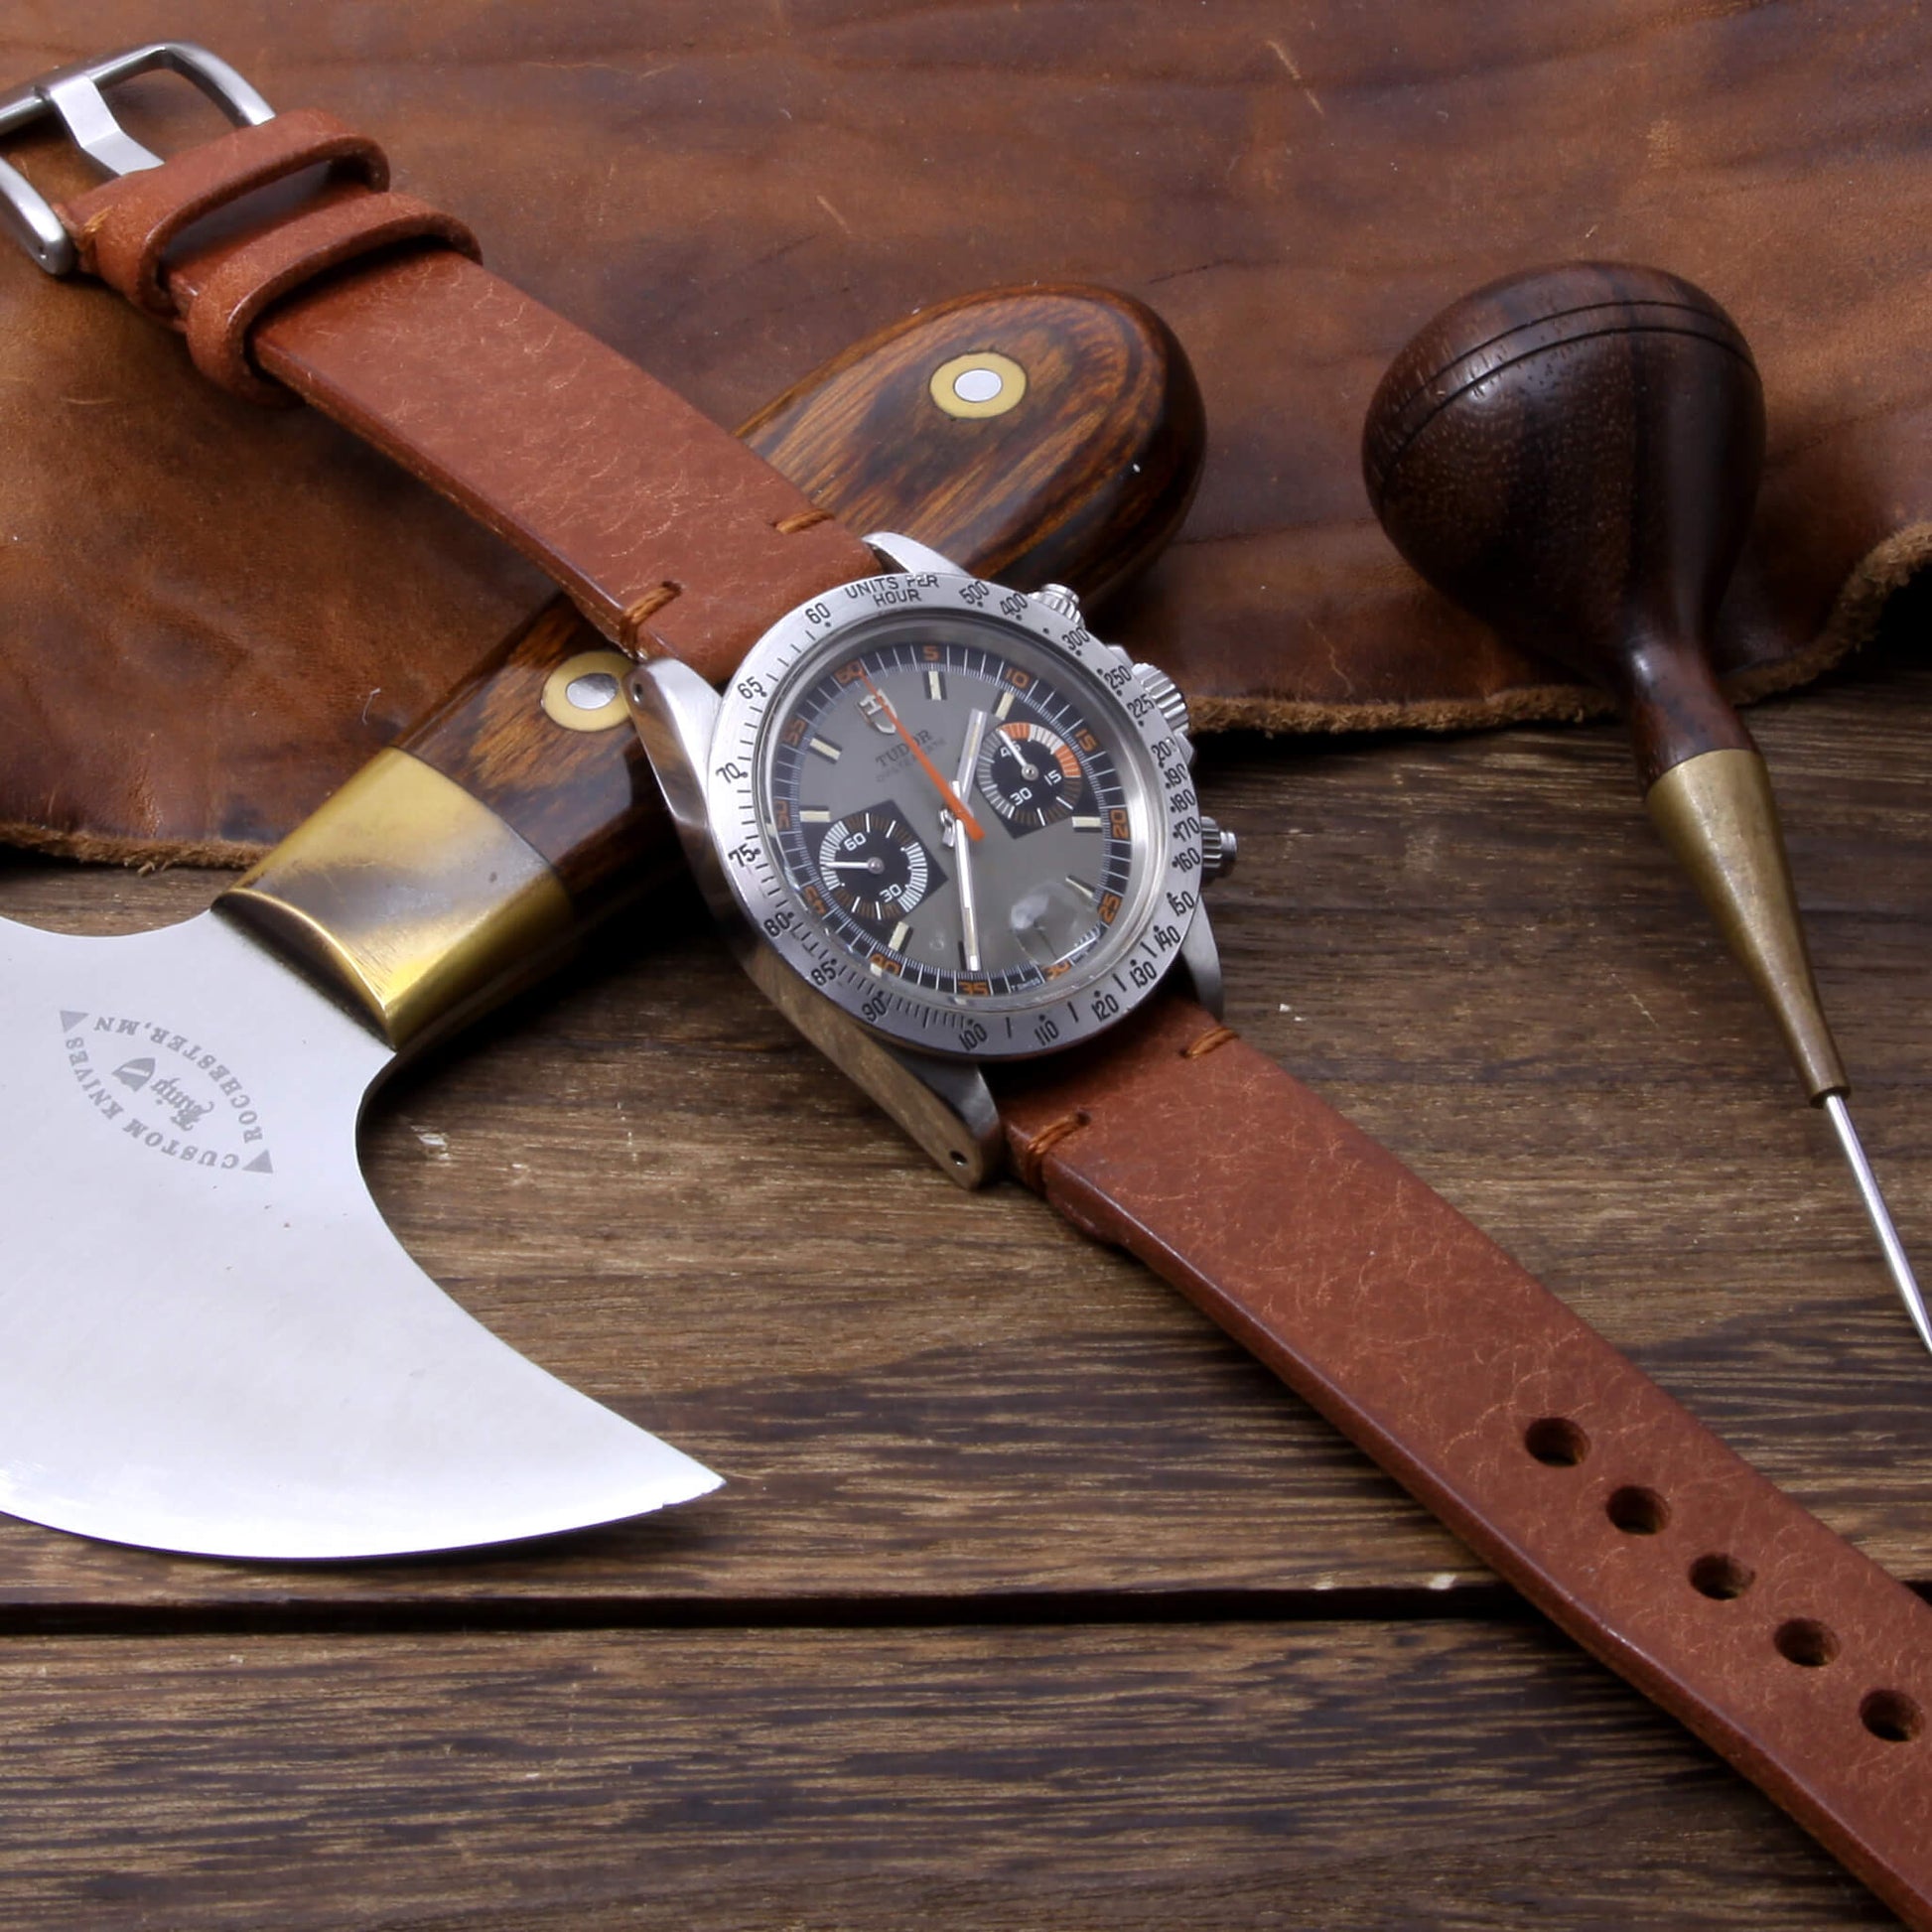  Italian Veg Tanned Leather Strap for Apple Watch in Rustic Russet